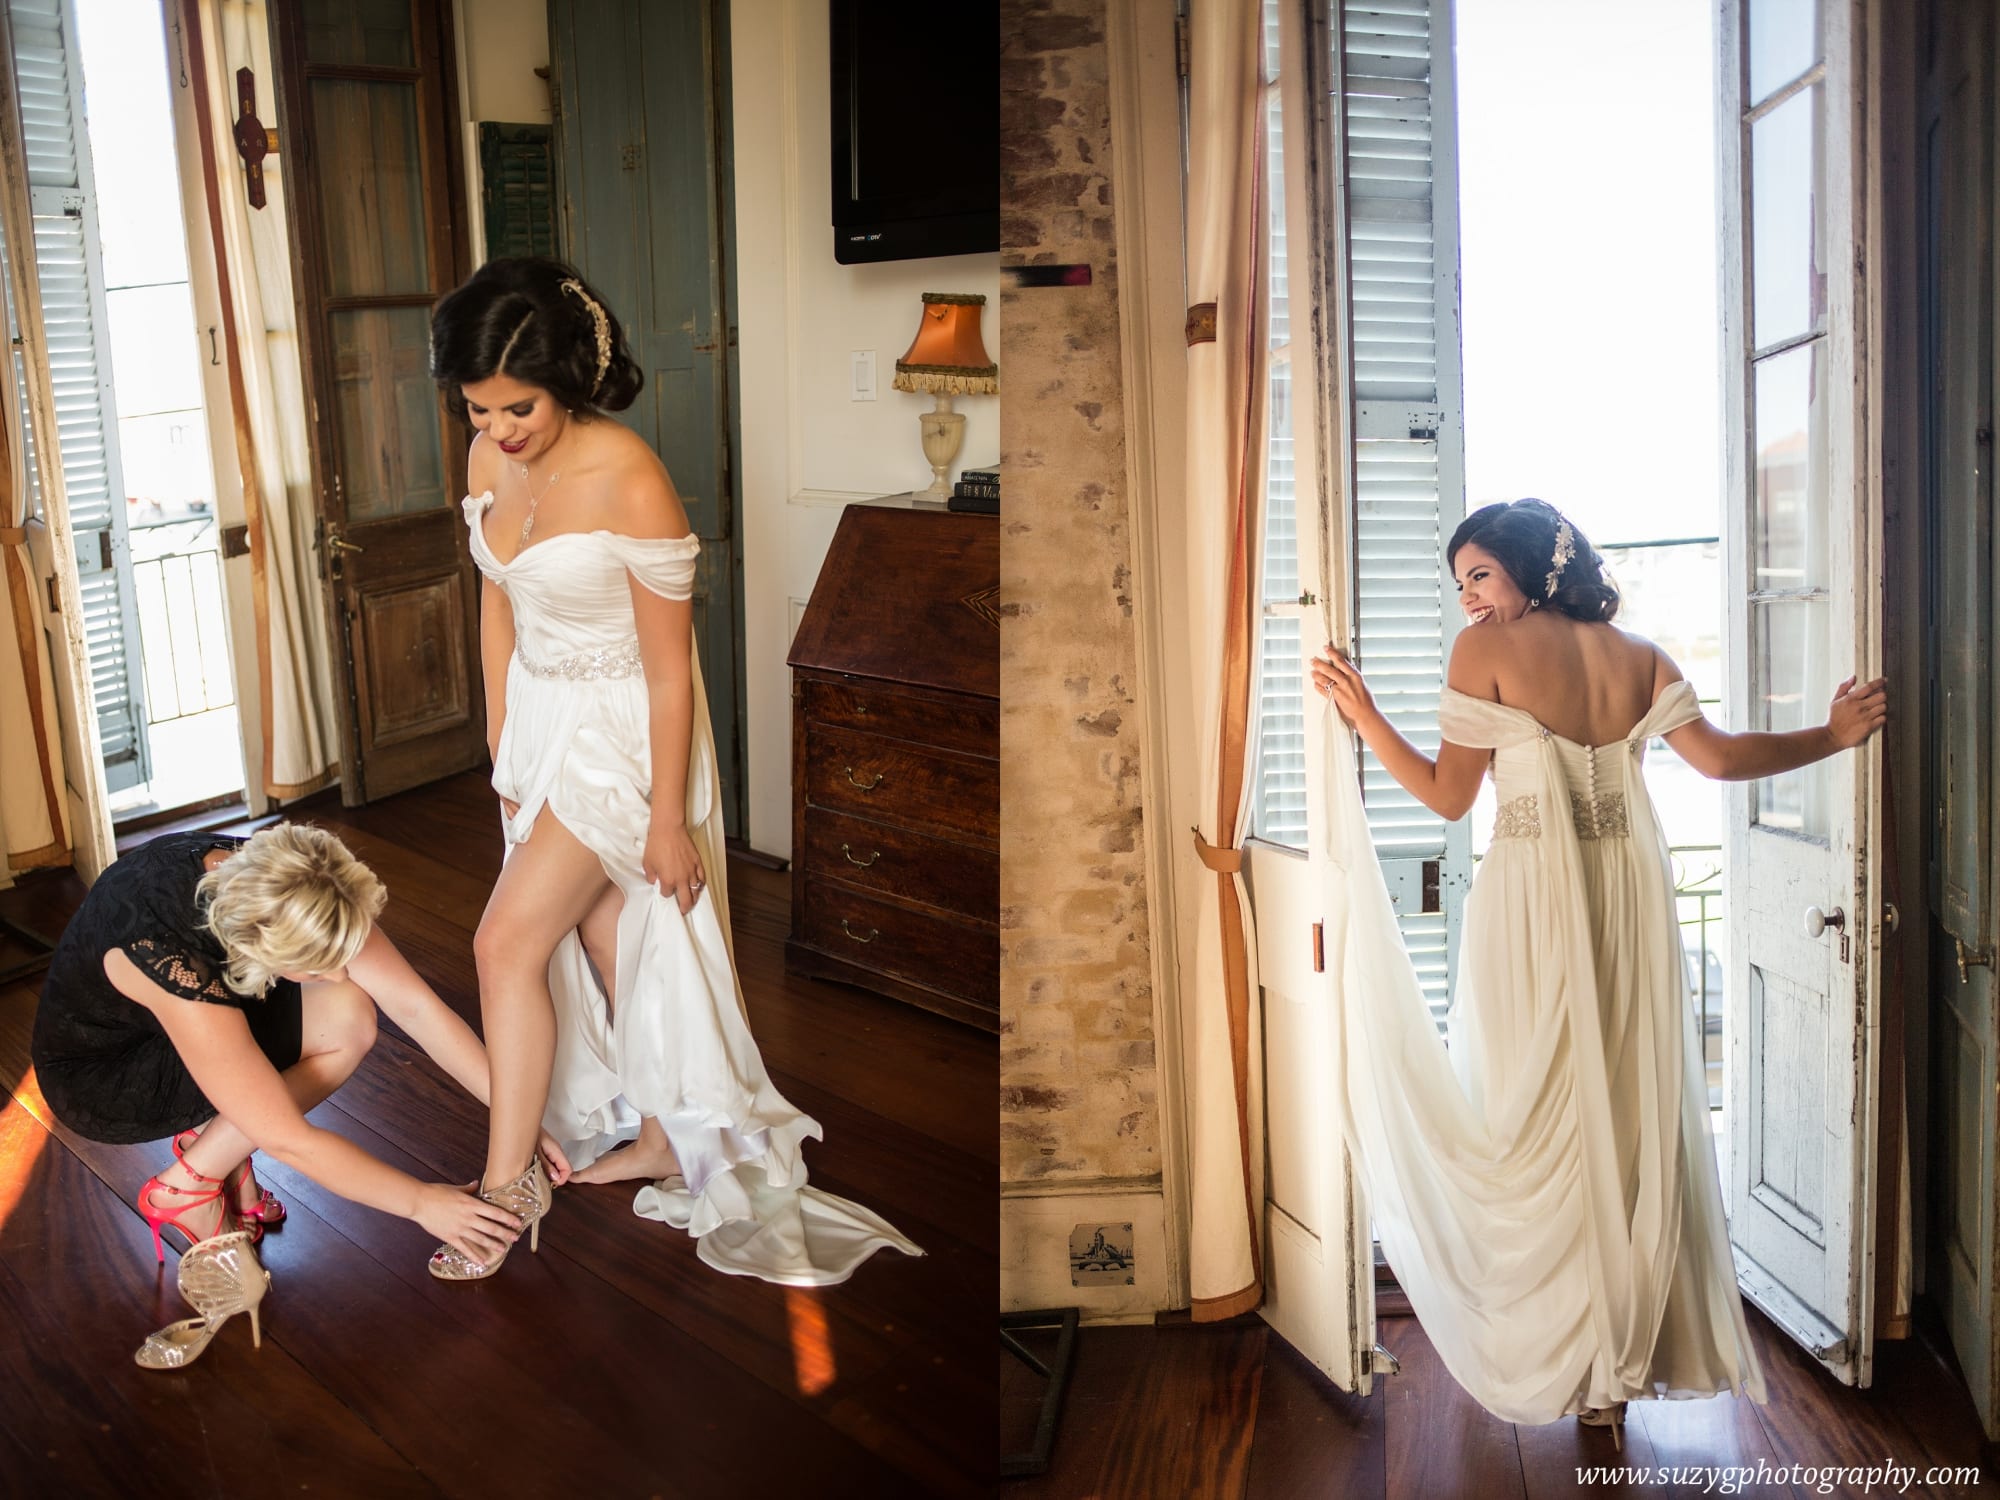 race and religious-new orleans wedding-nola-suzyg-suzy-g-photography-weddings-wedding photography_0015